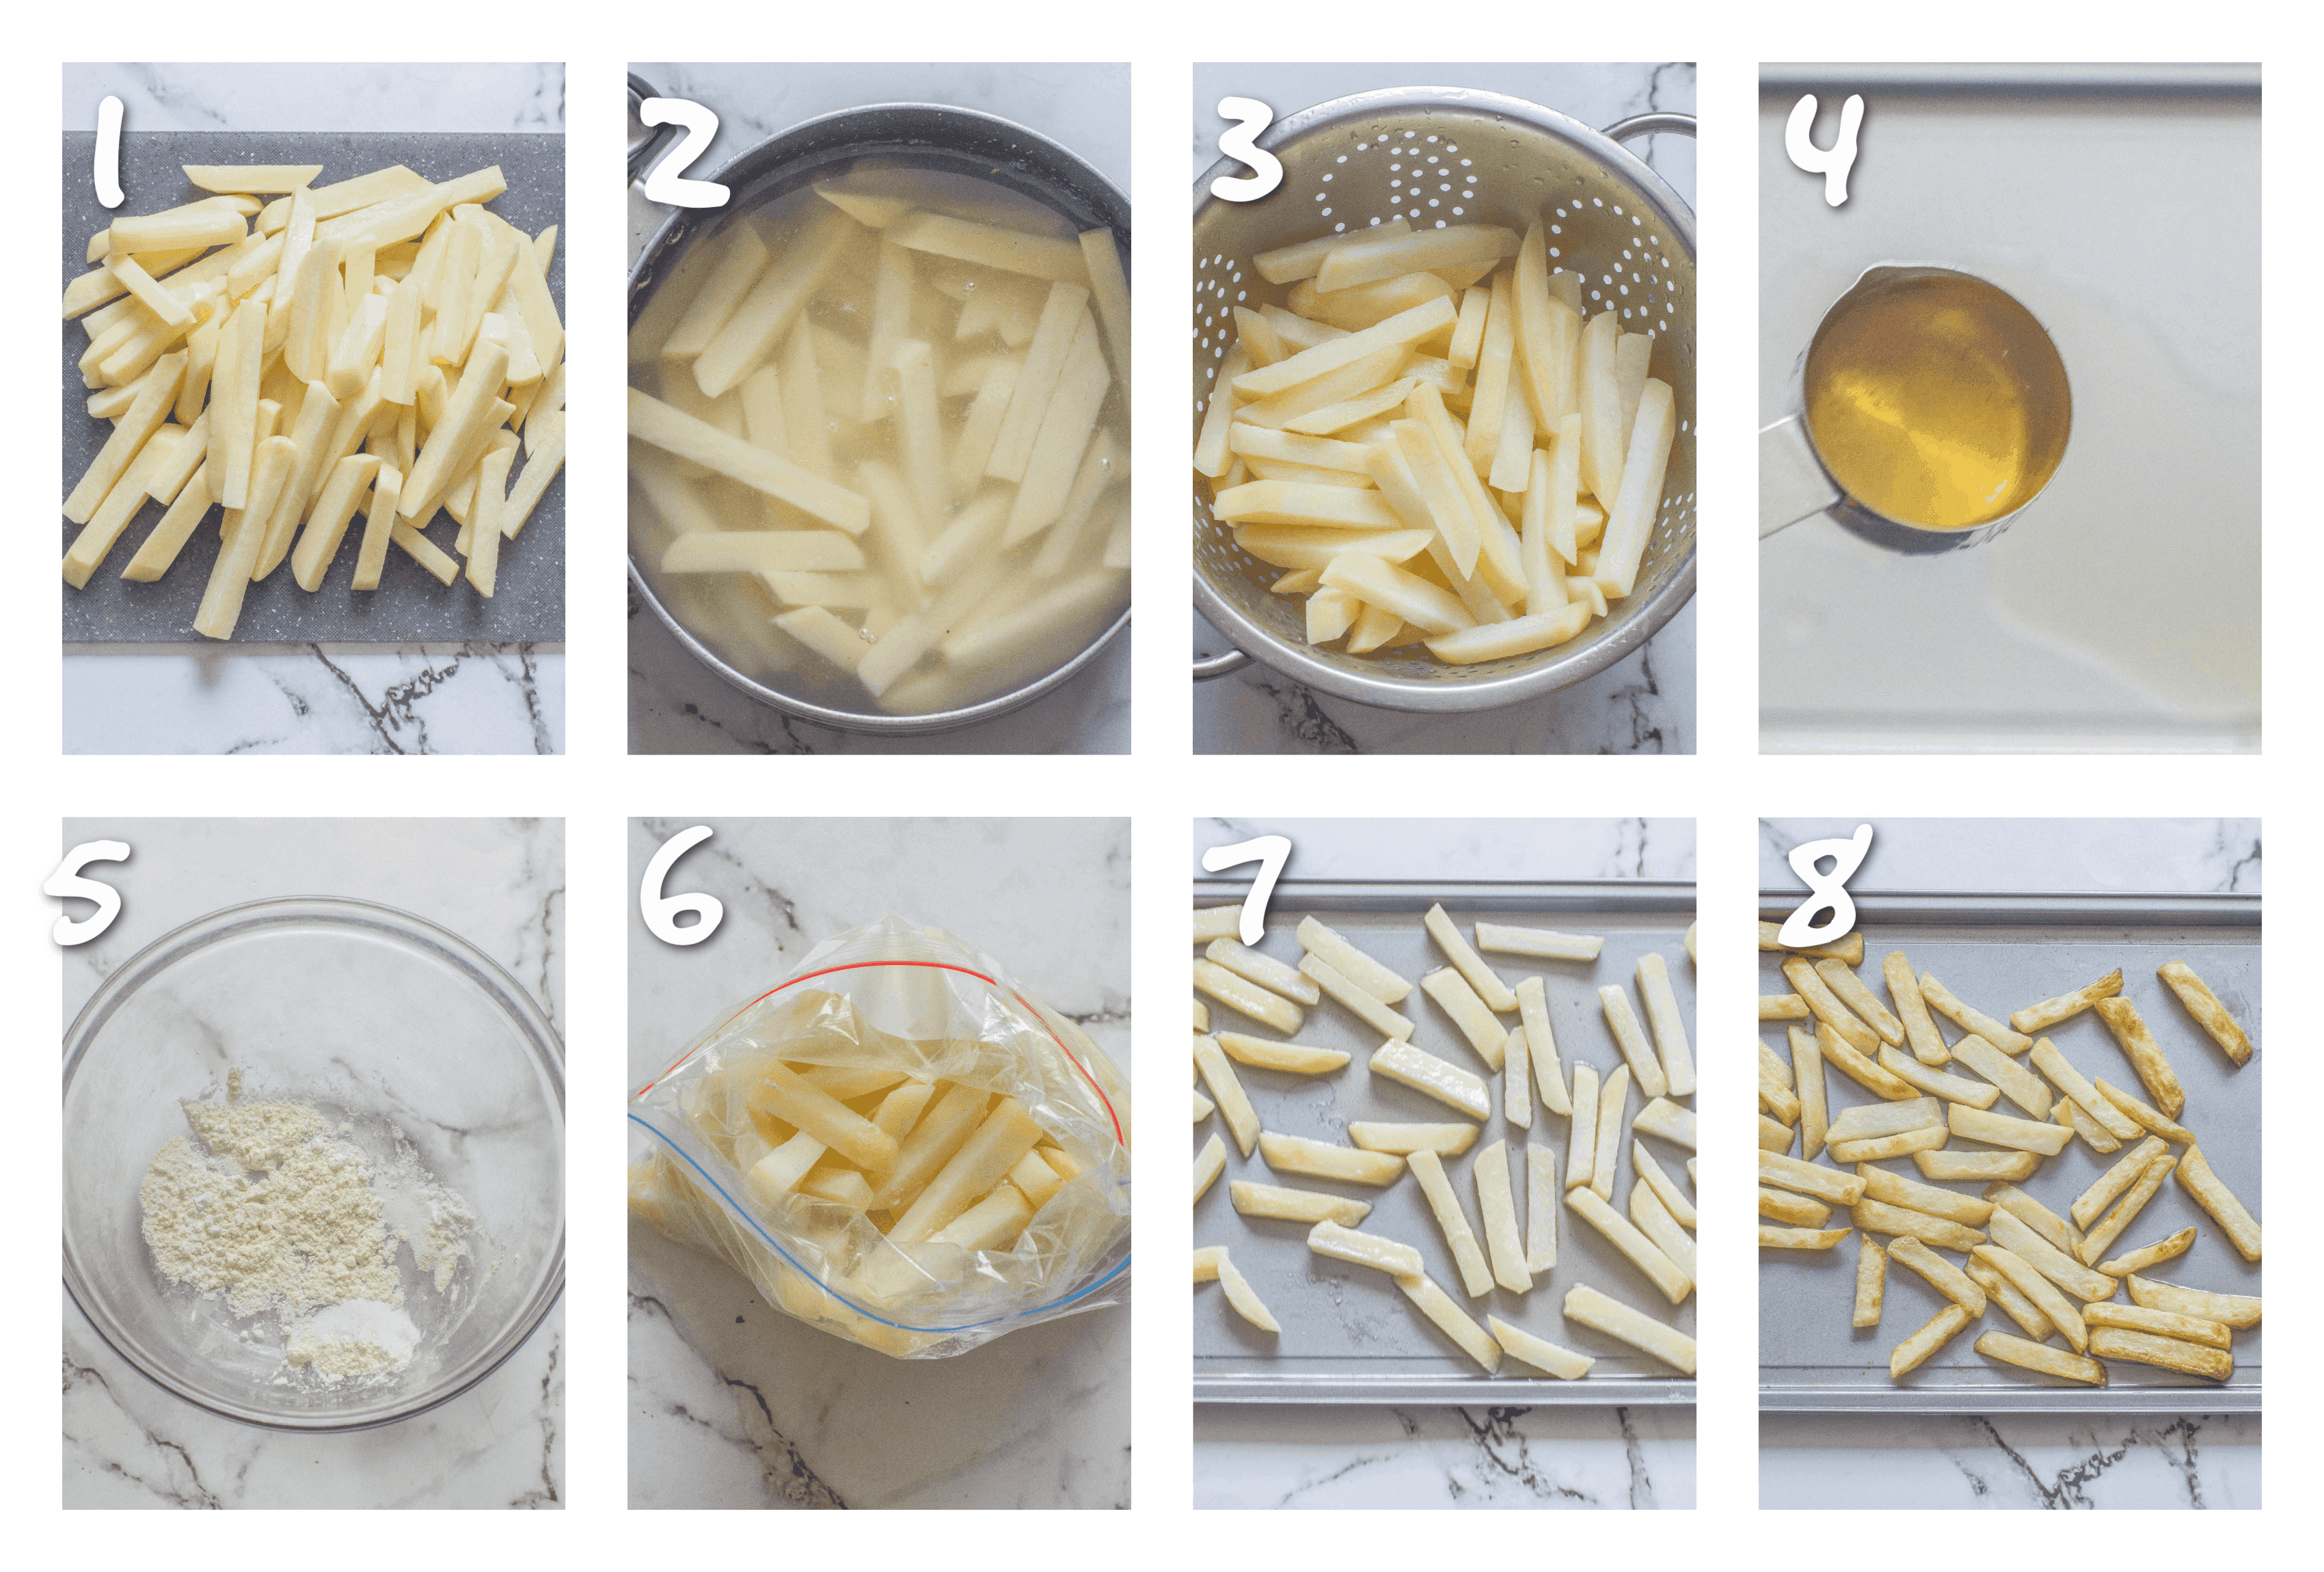 steps1-8 blanching and oven roasting the chips